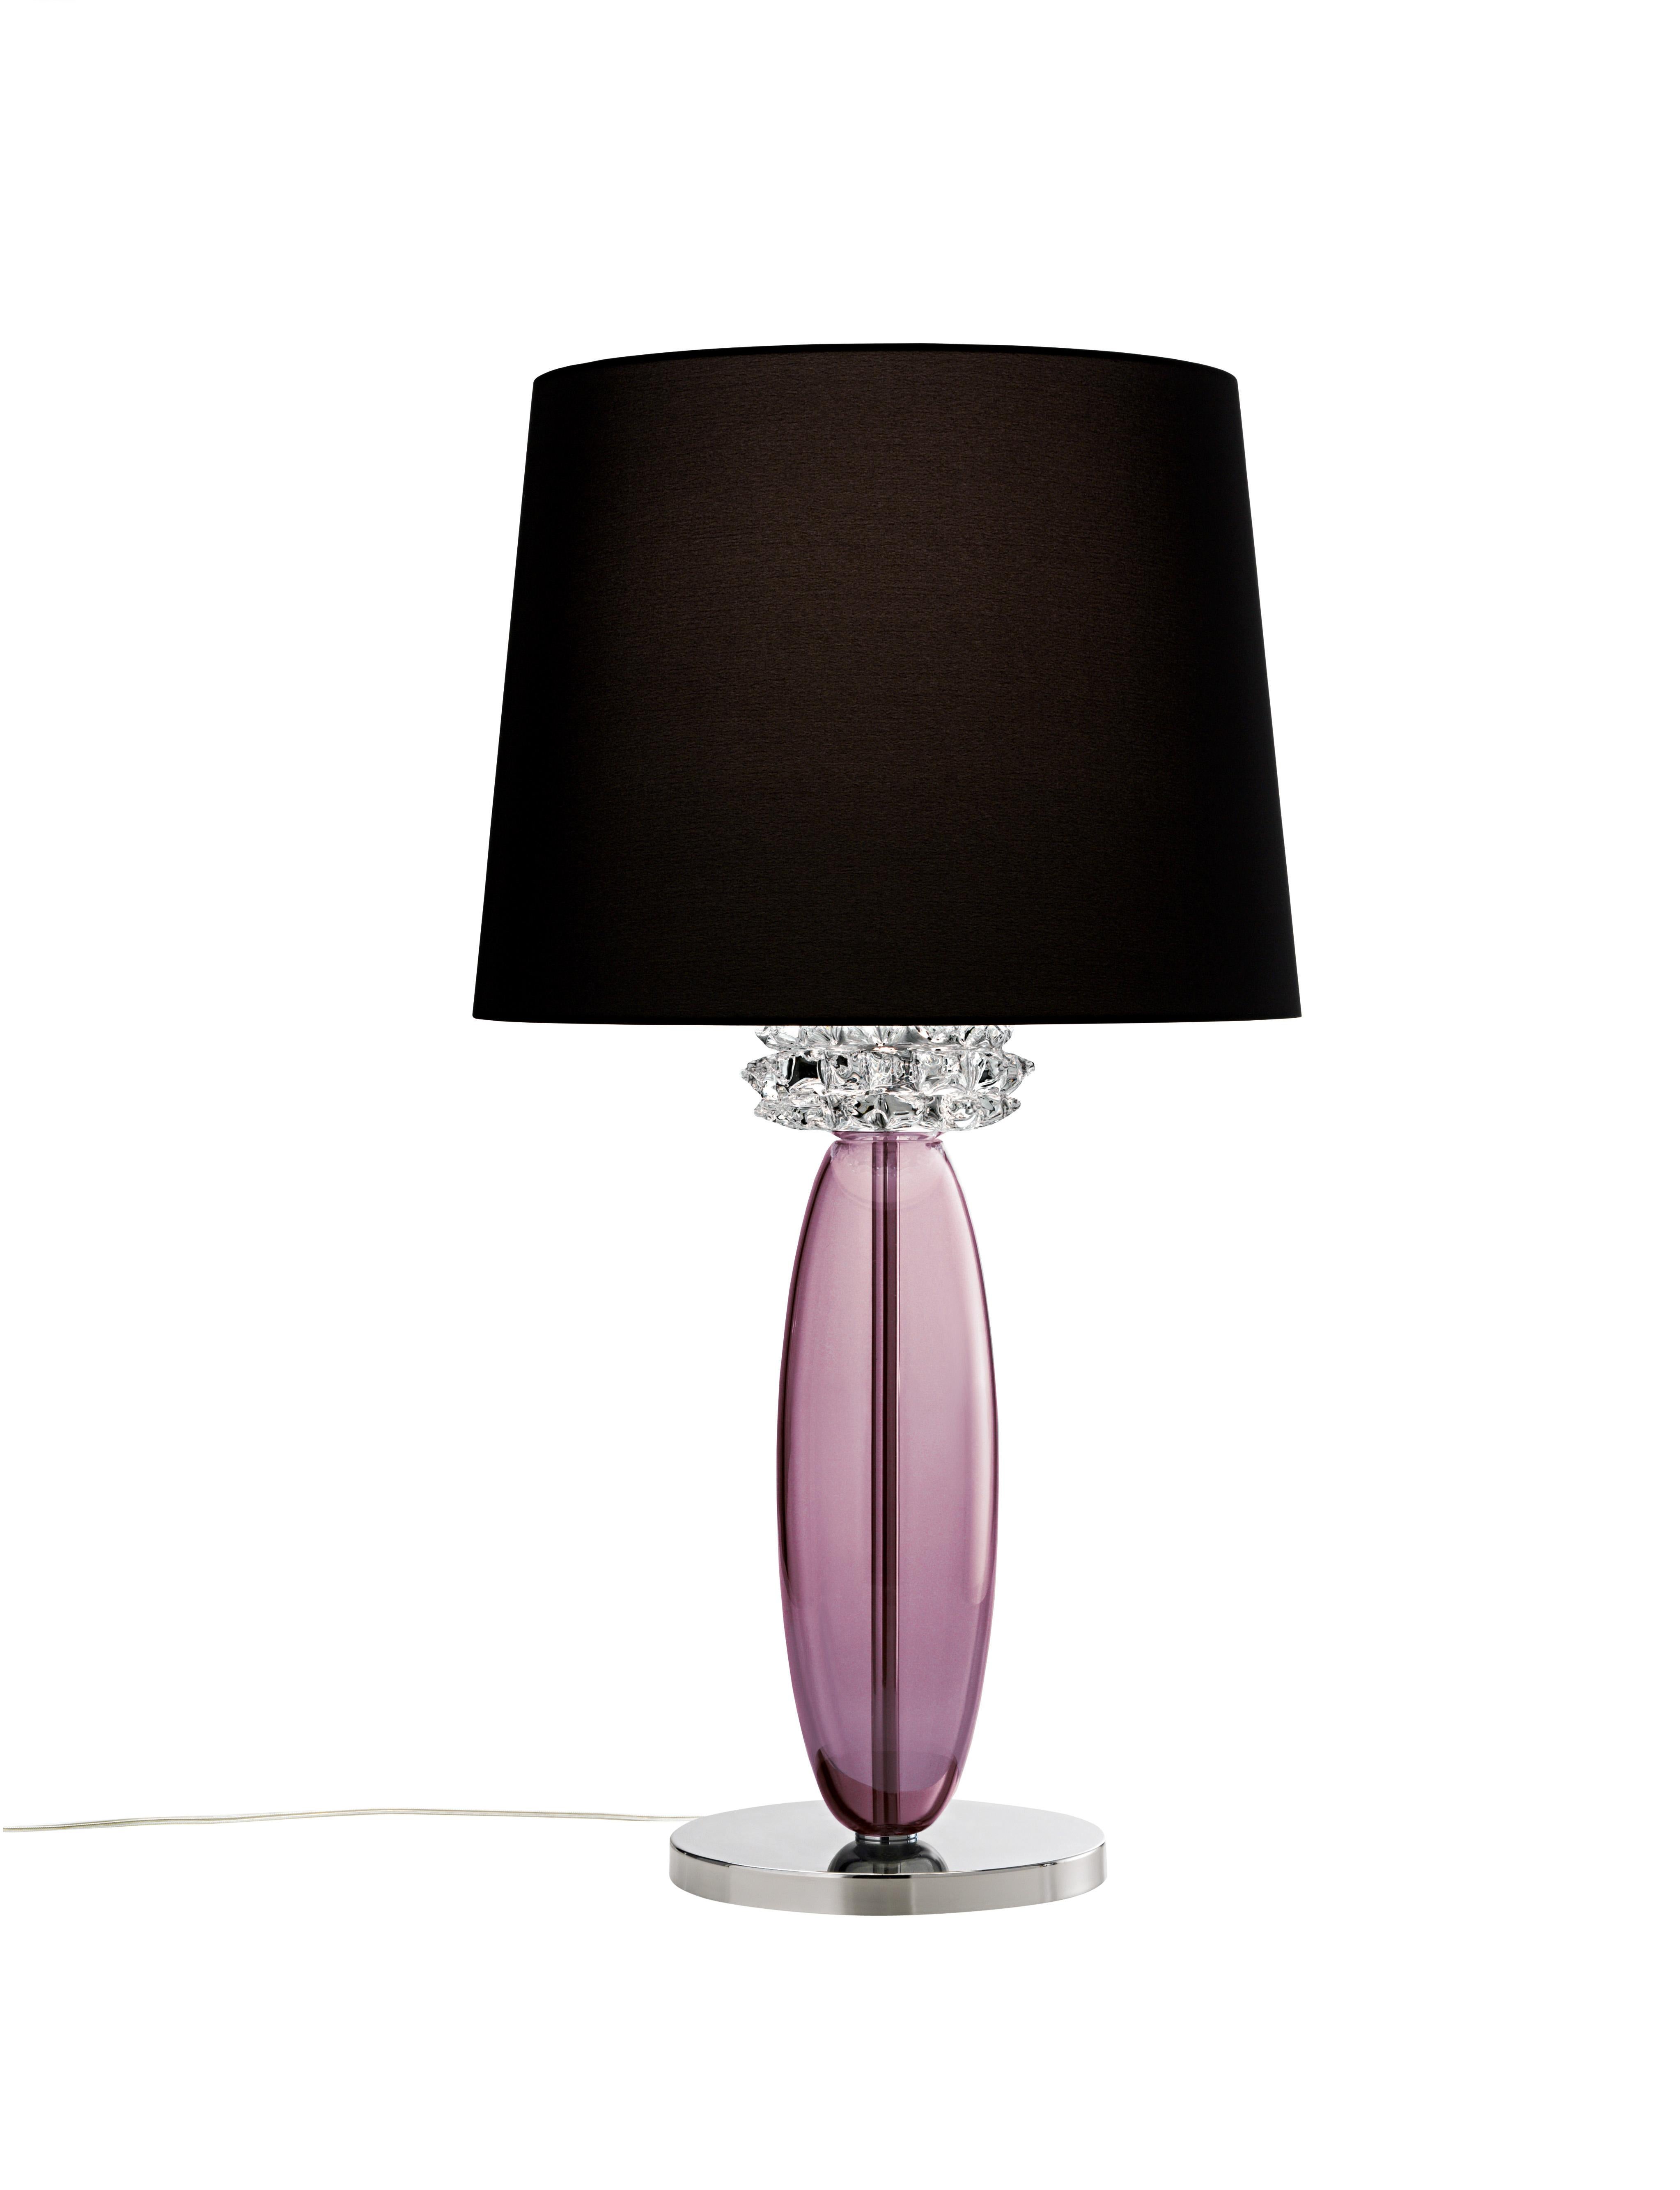 Purple (Violet_VI) Rotterdam 5565 Table Lamp in Glass with Black Shade, by Barovier&Toso